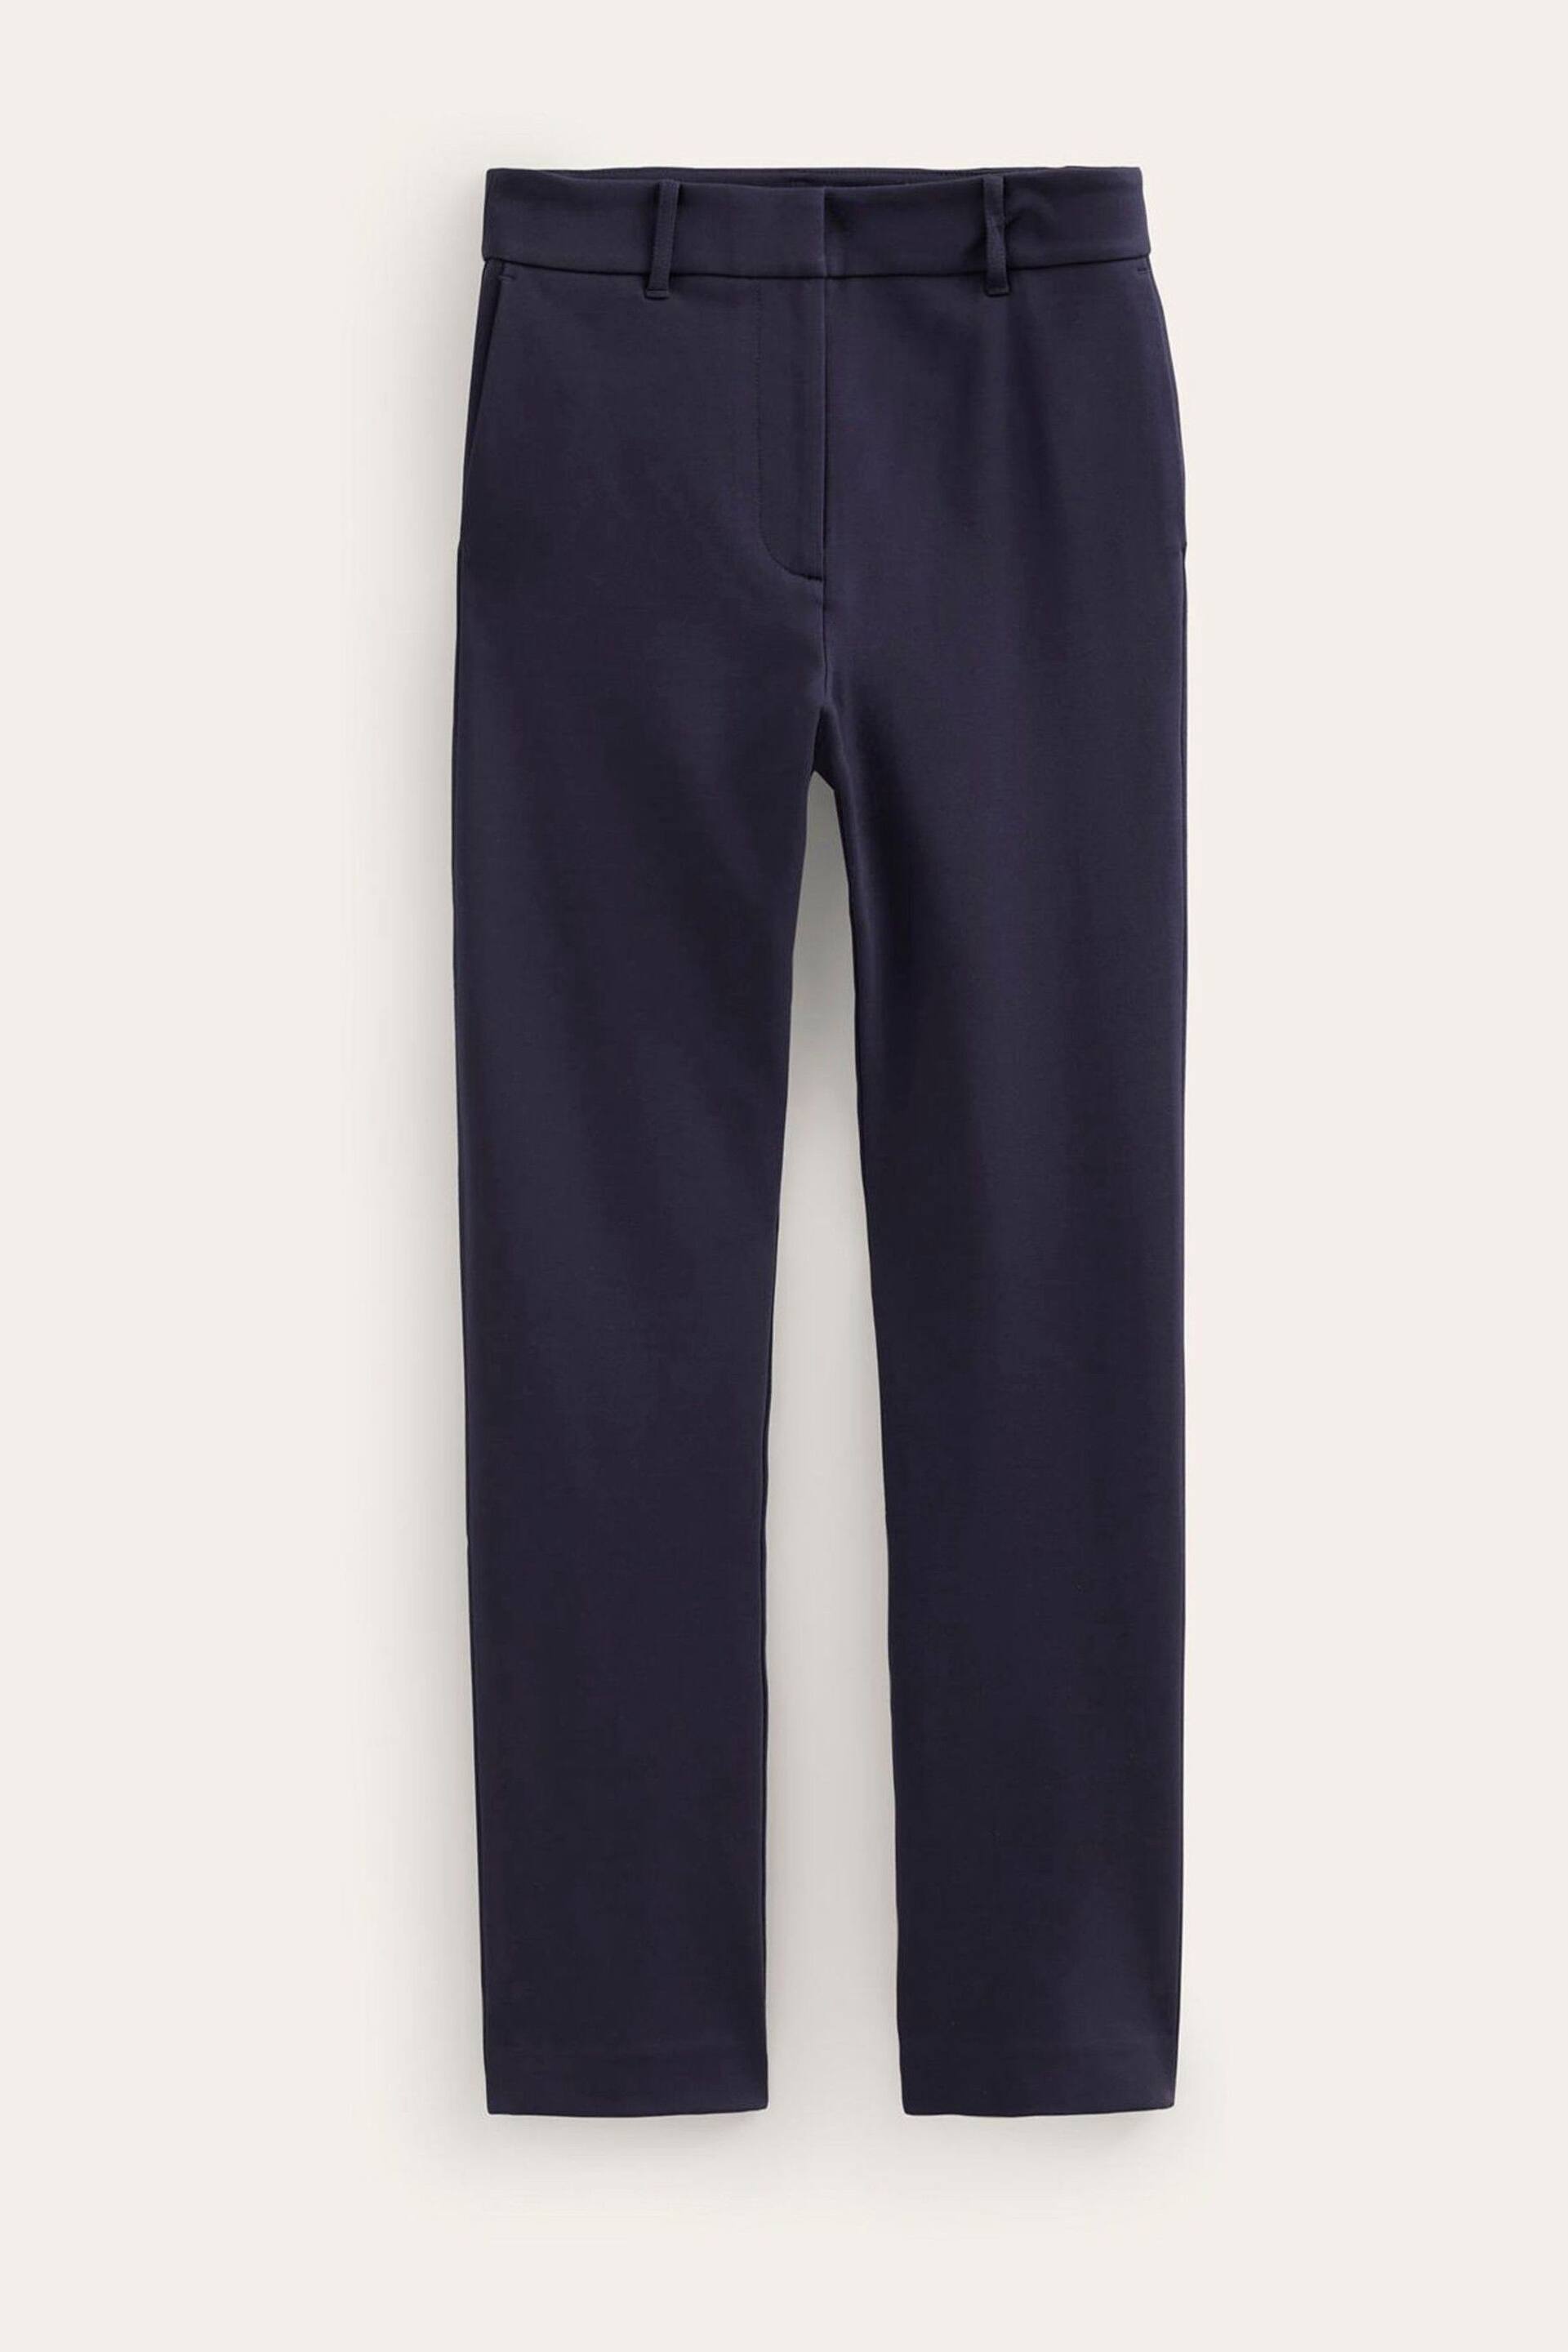 Boden Blue Highgate Ponte Trousers - Image 5 of 5